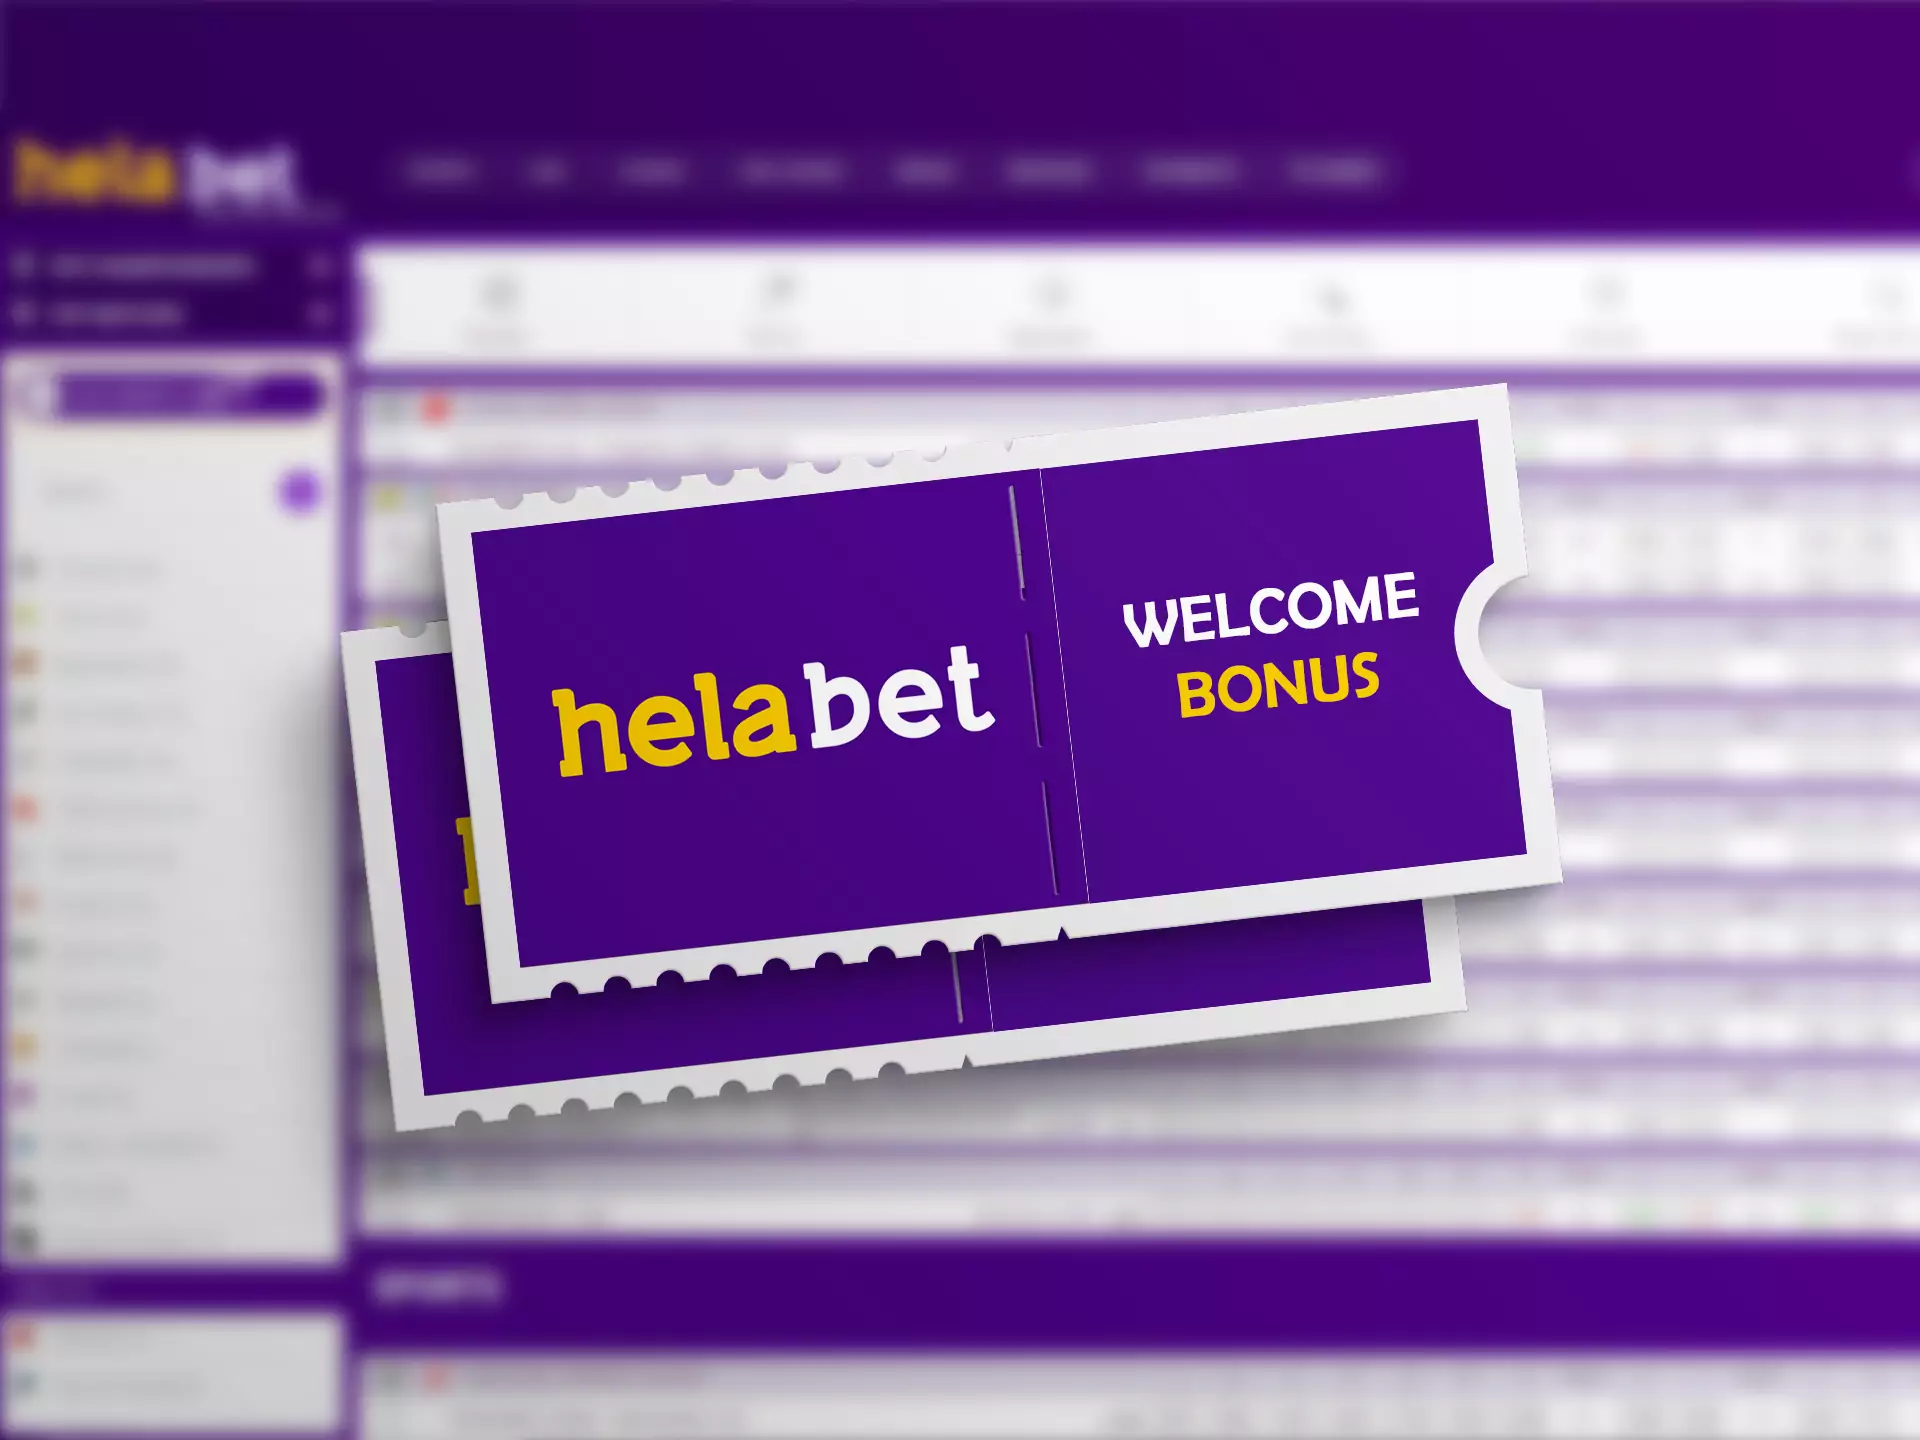 The first deposit bonus is given to all new Helabet users.